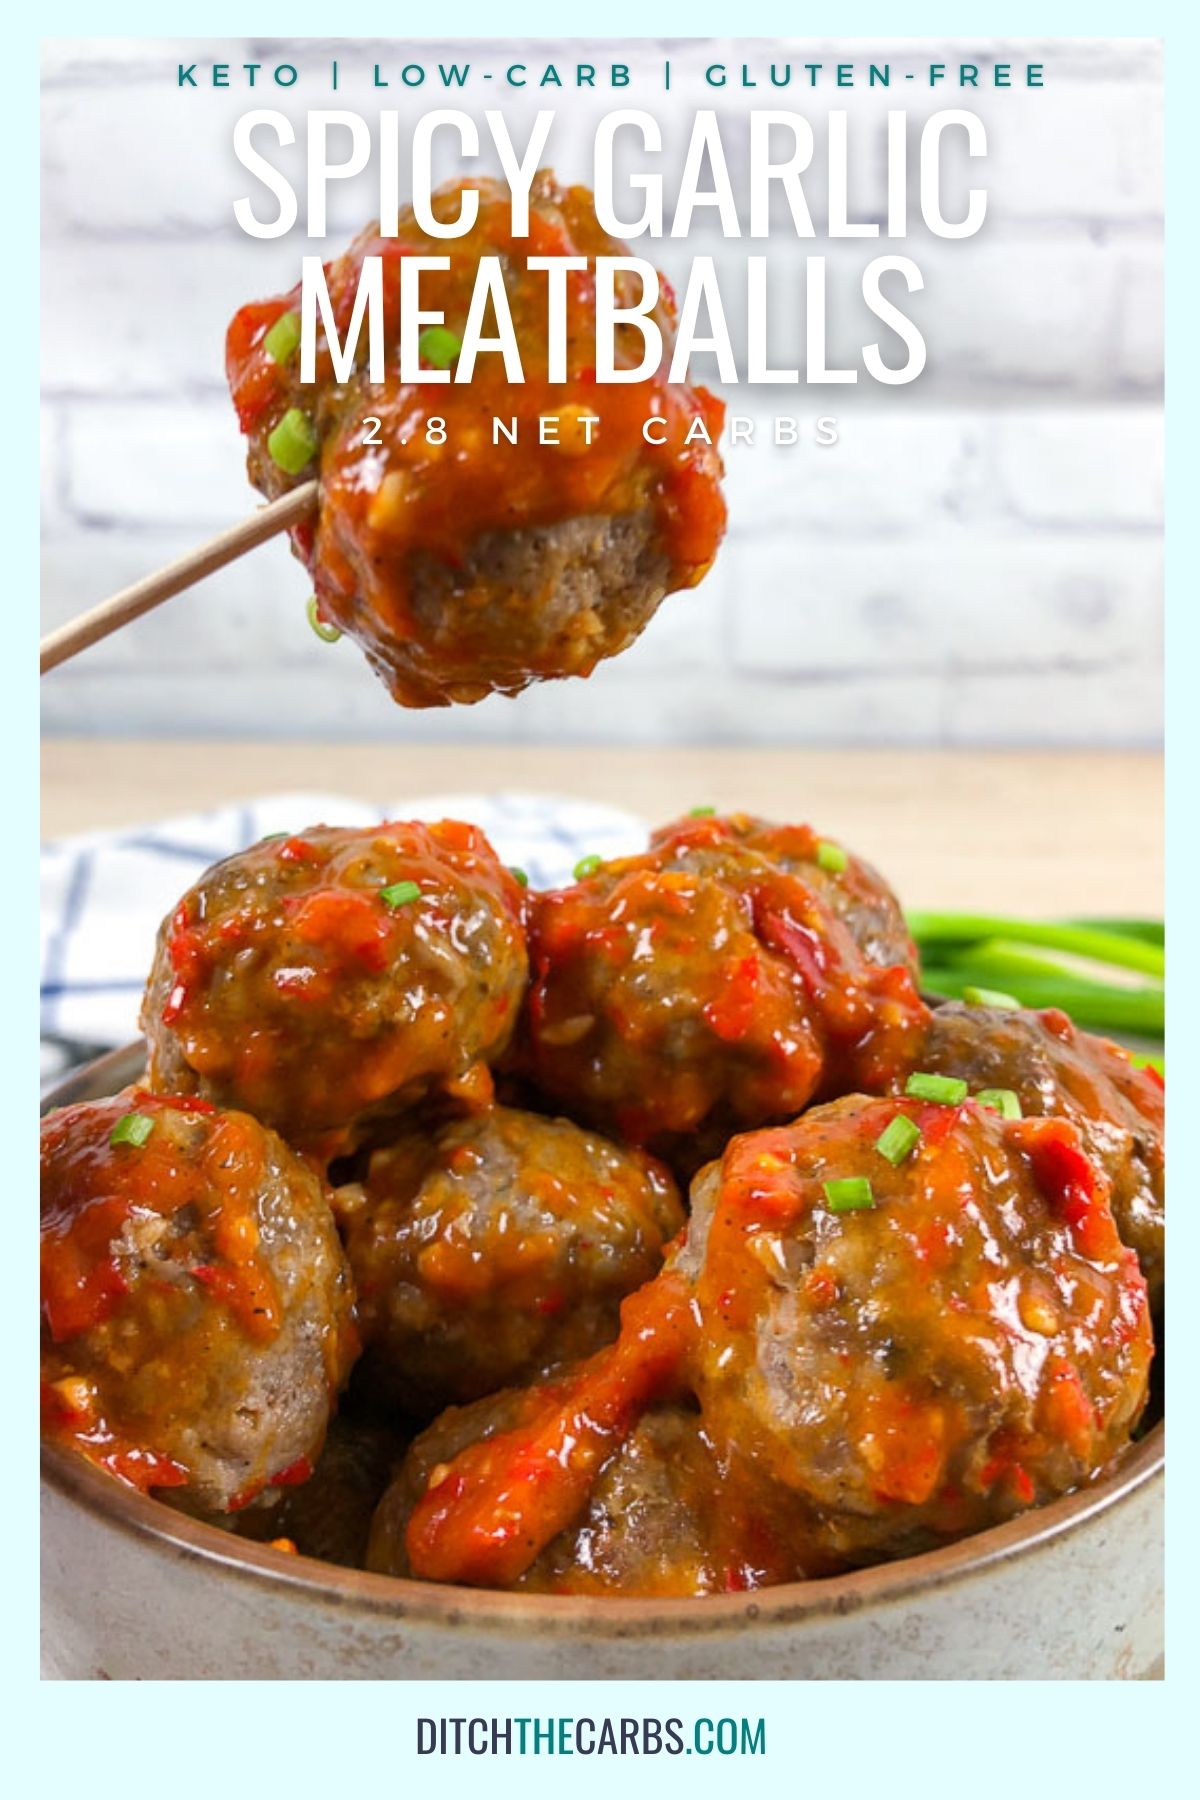 A toothpick is lifting a keto spicy garlic meatballs our of bowl filled with meatballs.